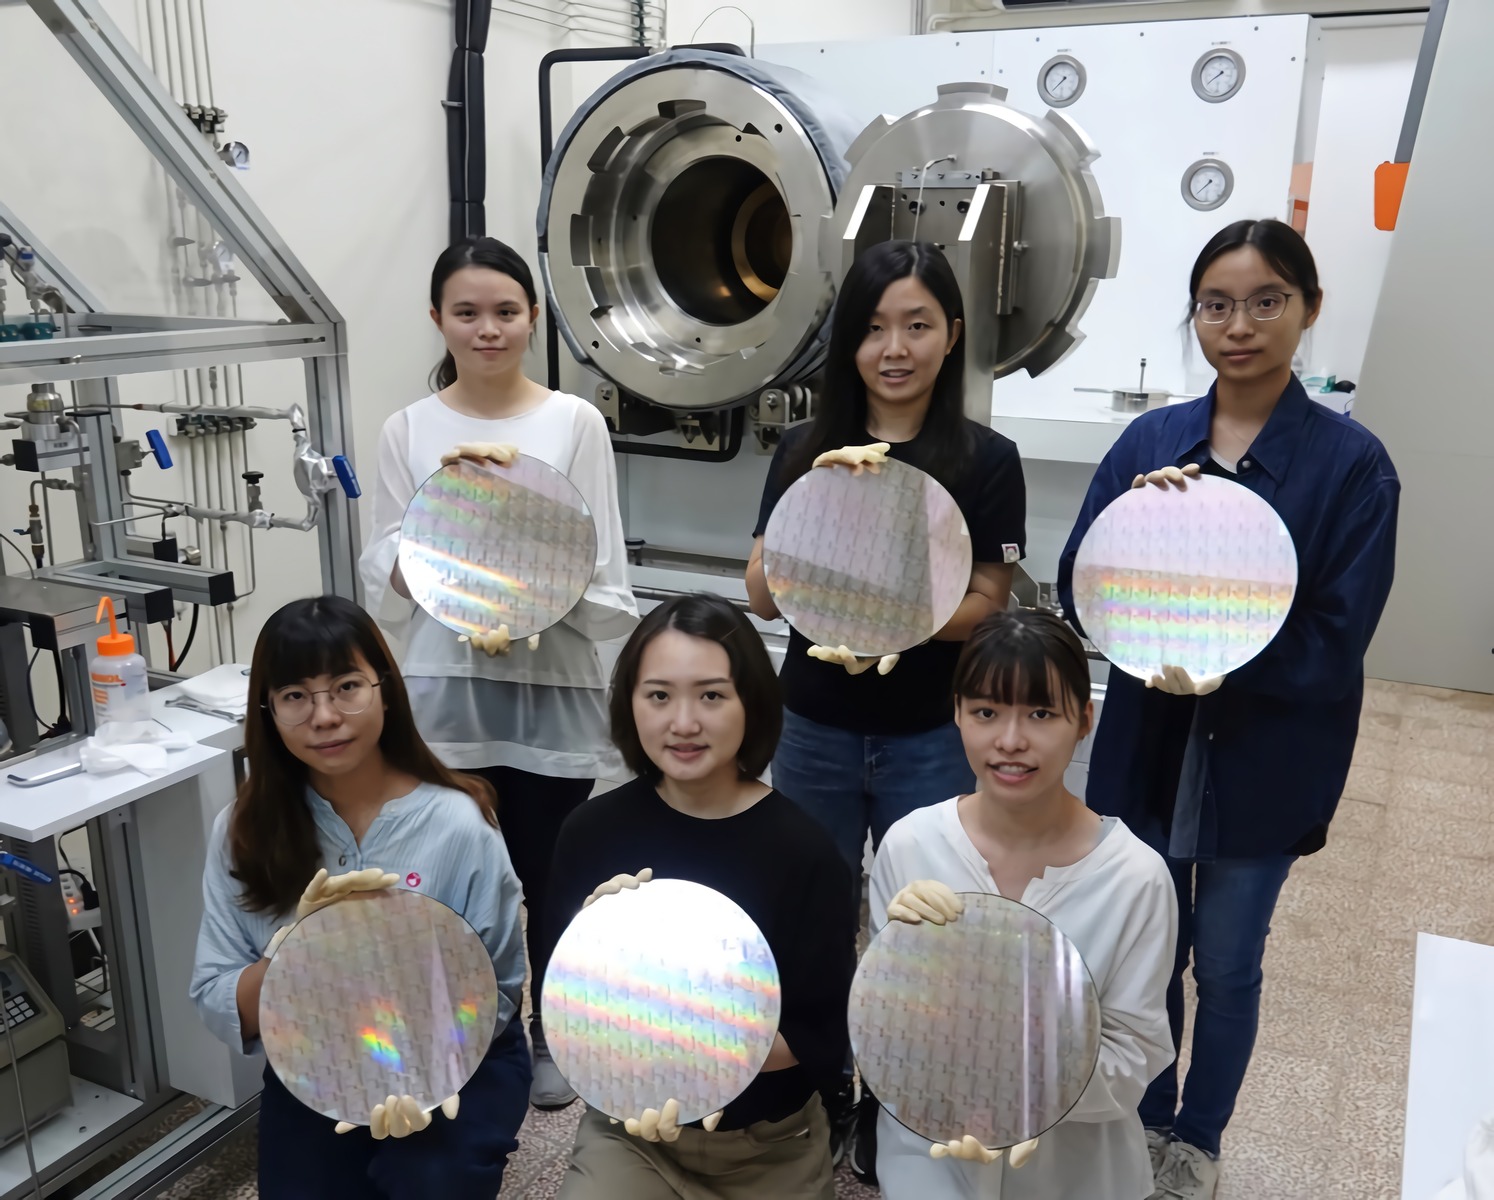 NSYSU’s original Supercritical Fluid Technology is proved to be applicable to the 12-inch chip wafer and its machine